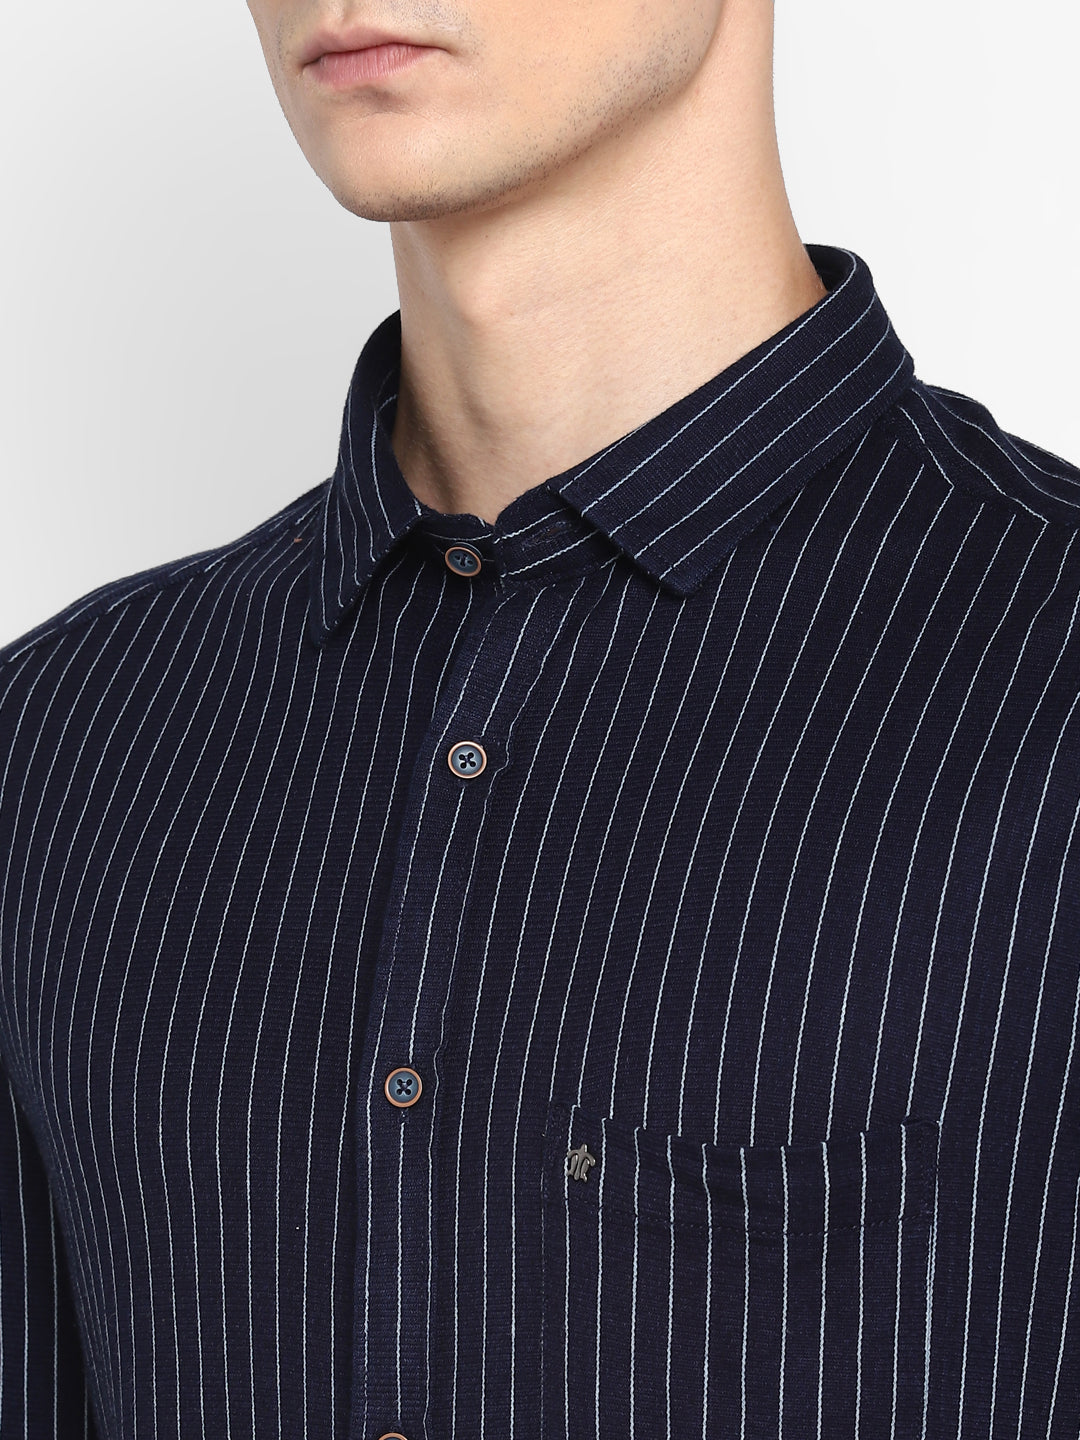 Turtle Men Navy Knitted Striped Ultra Slim Fit Shirts